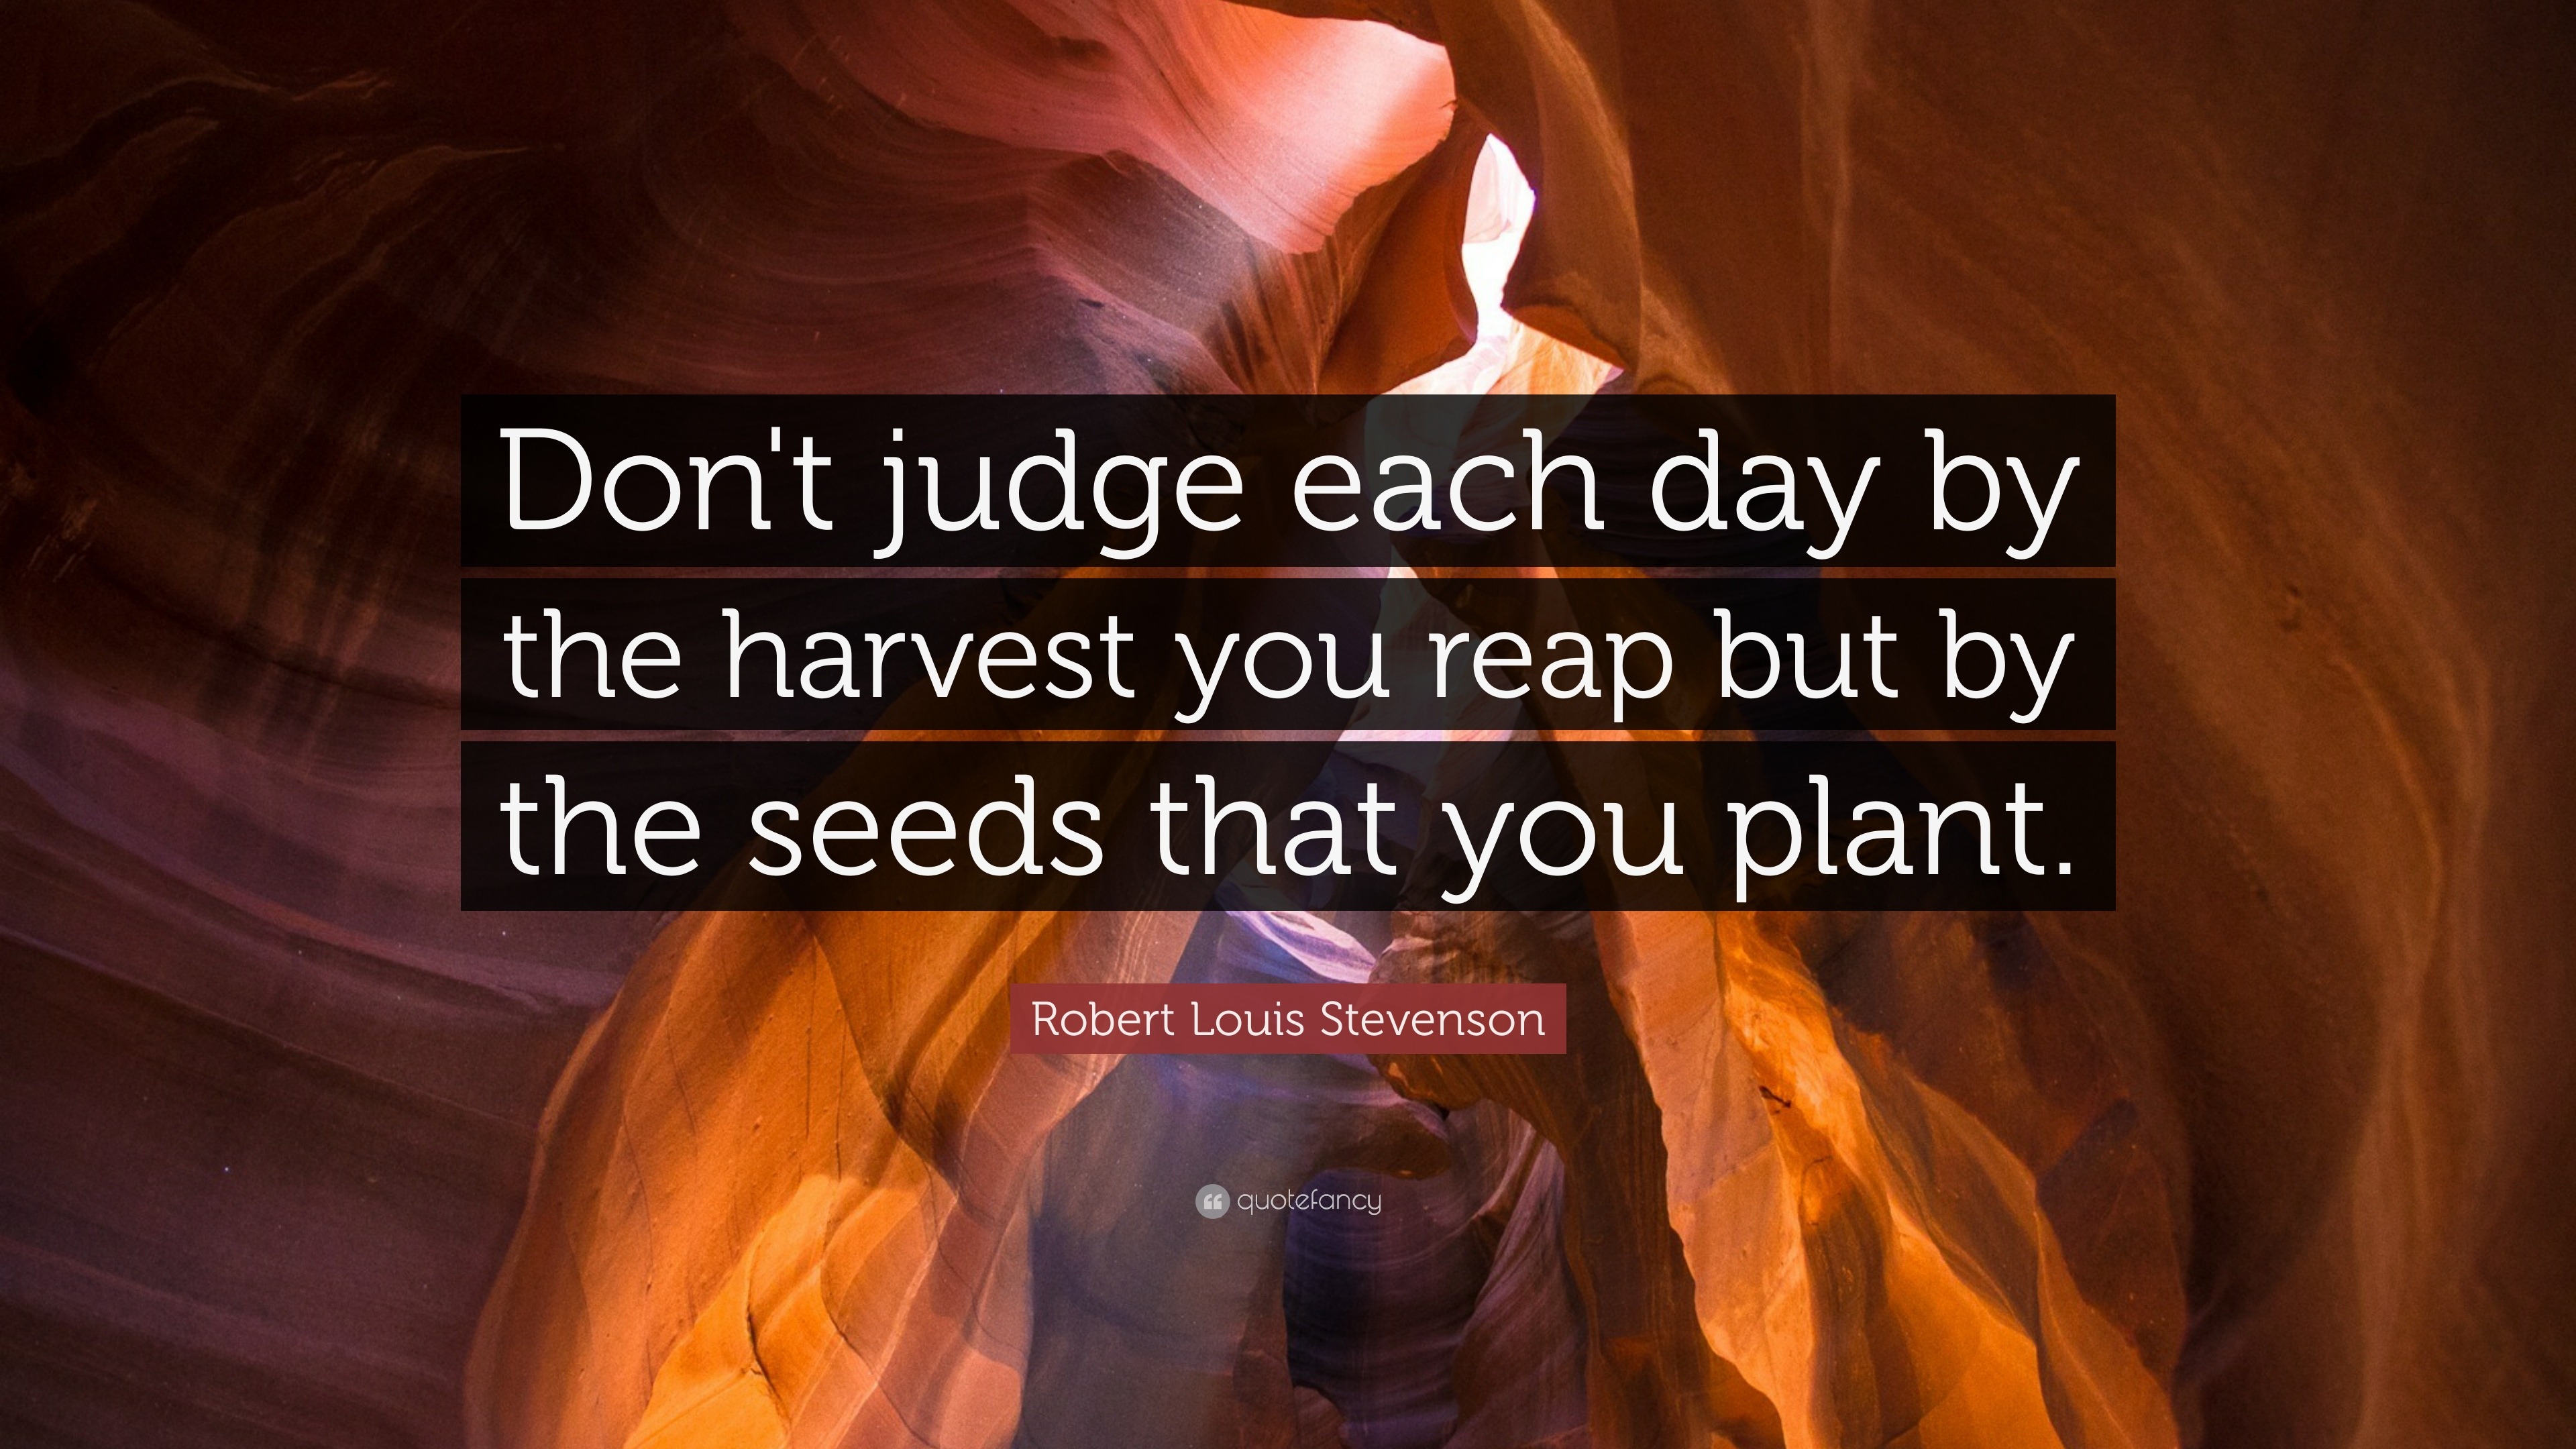 Robert Louis Stevenson Quote: "Don't judge each day by the harvest you reap but by the seeds ...